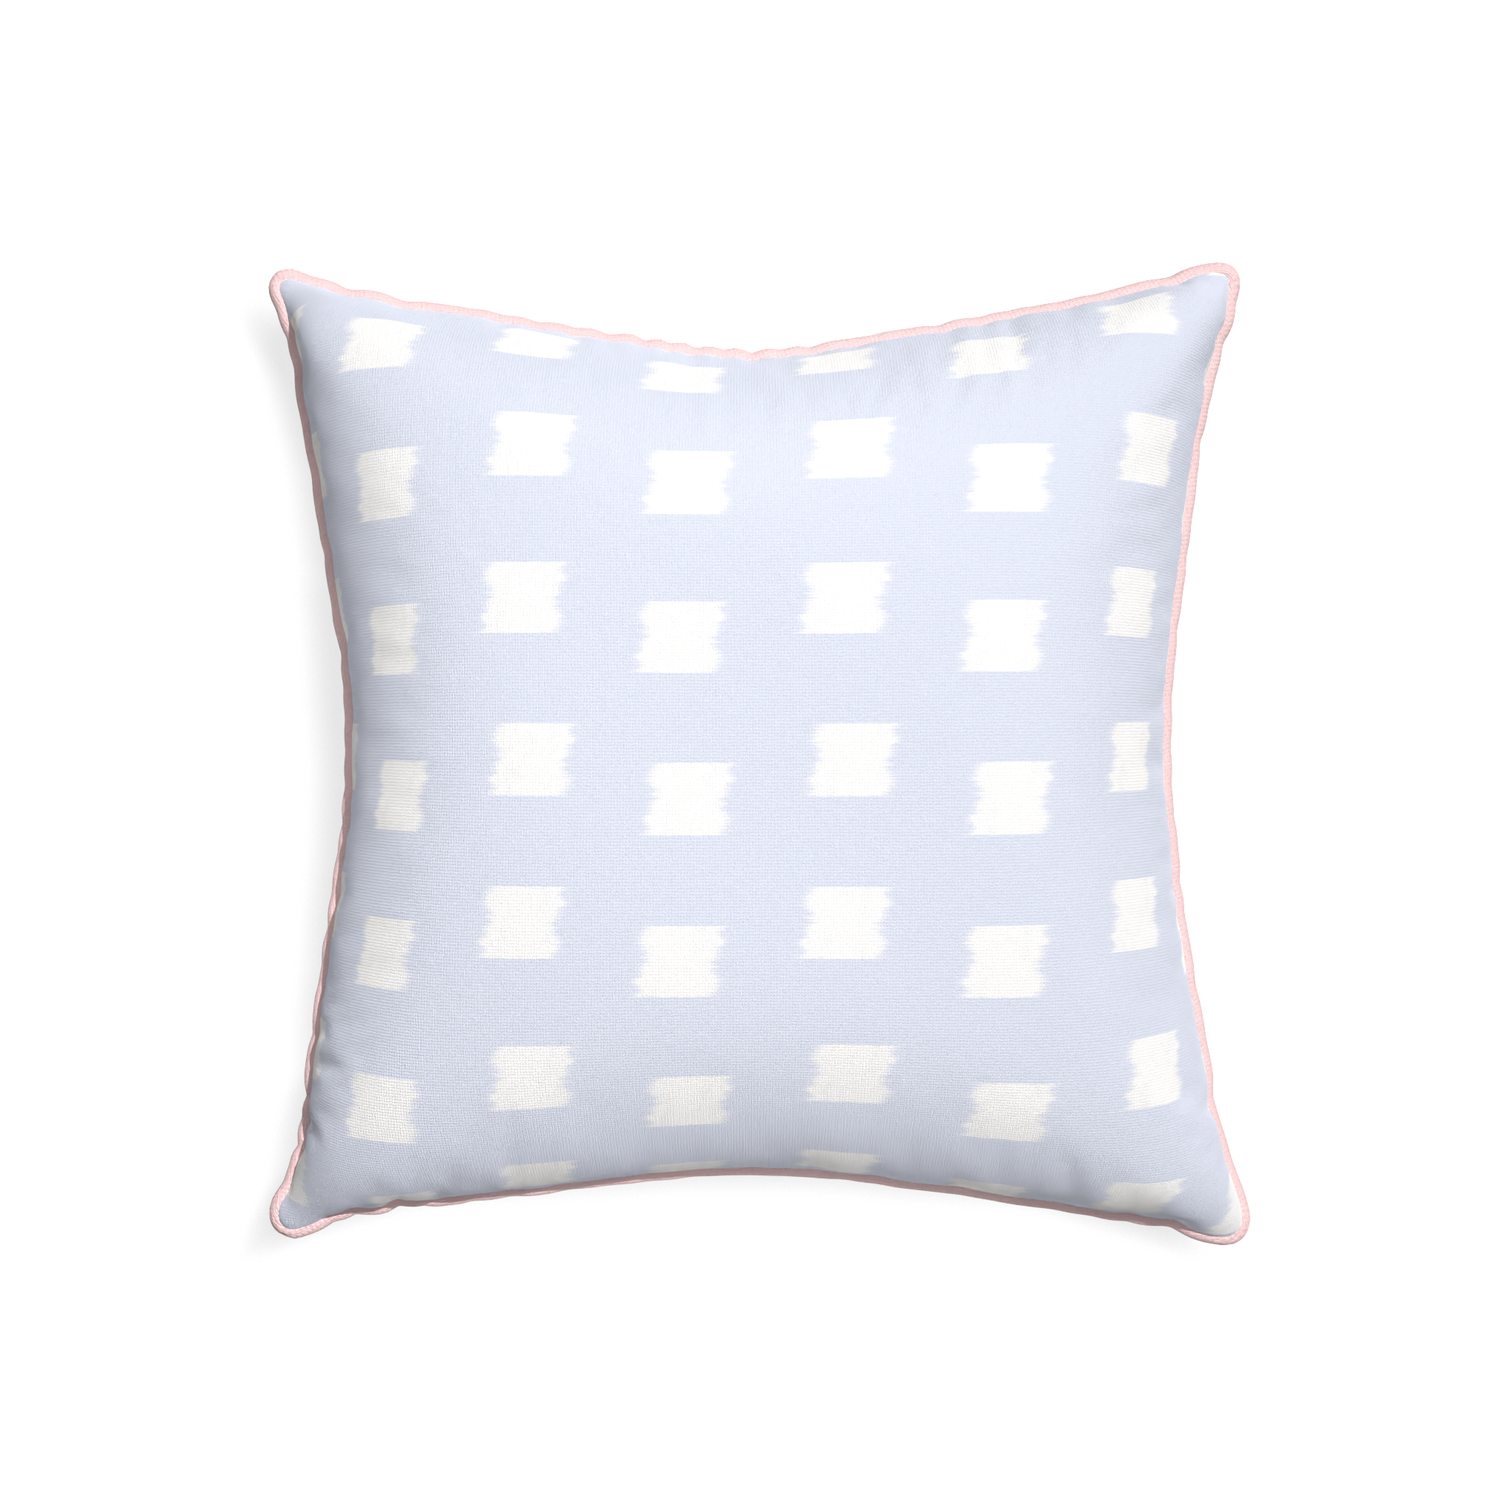 22-square denton custom pillow with petal piping on white background